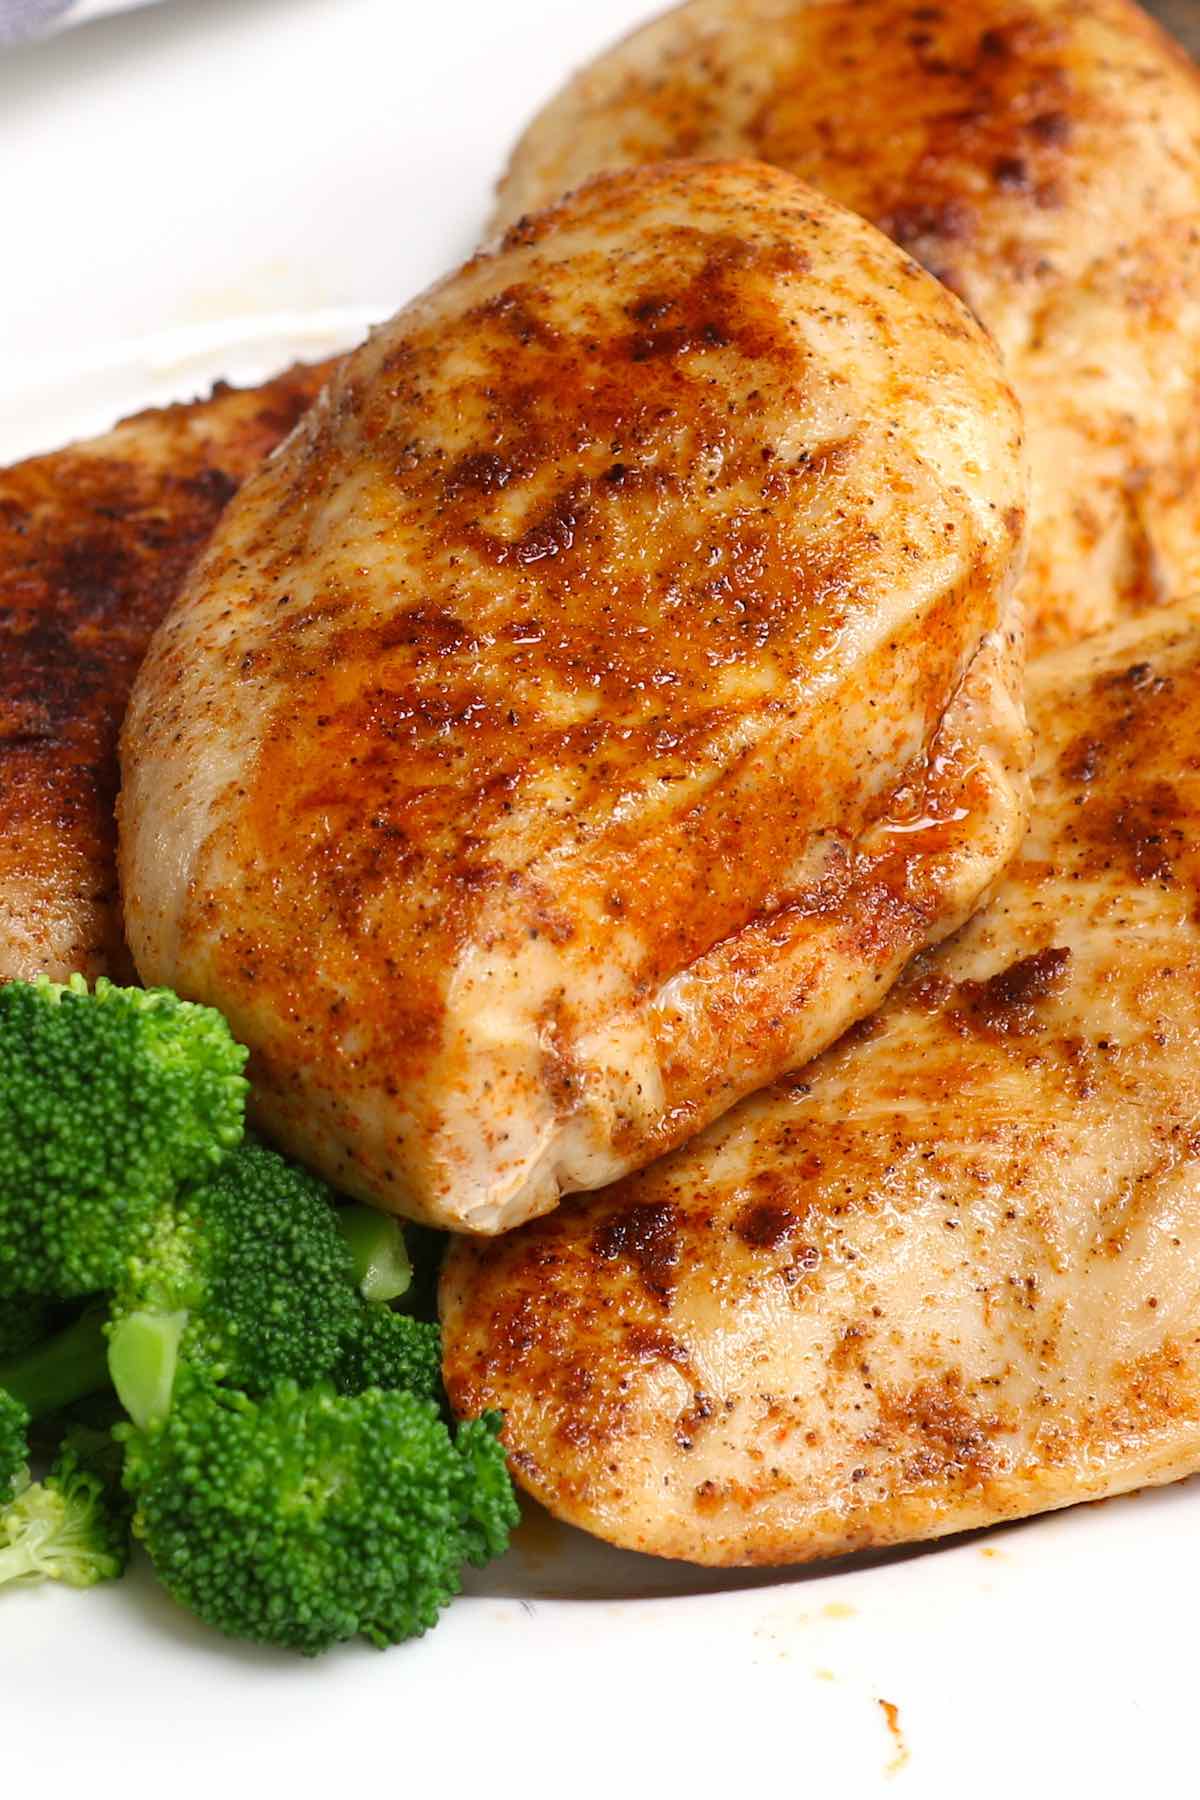 This Sous Vide Boneless Chicken Breasts recipe makes super juicy and tender chicken that’s impossible to achieve with traditional method! Forget dry chicken breasts with sous vide technique, which allows you to control the temperature precisely and produces the perfect chicken that’s full of flavor! #SousVideBonelessChickenBreast #SousVideChickenBreast #SousVideChicken